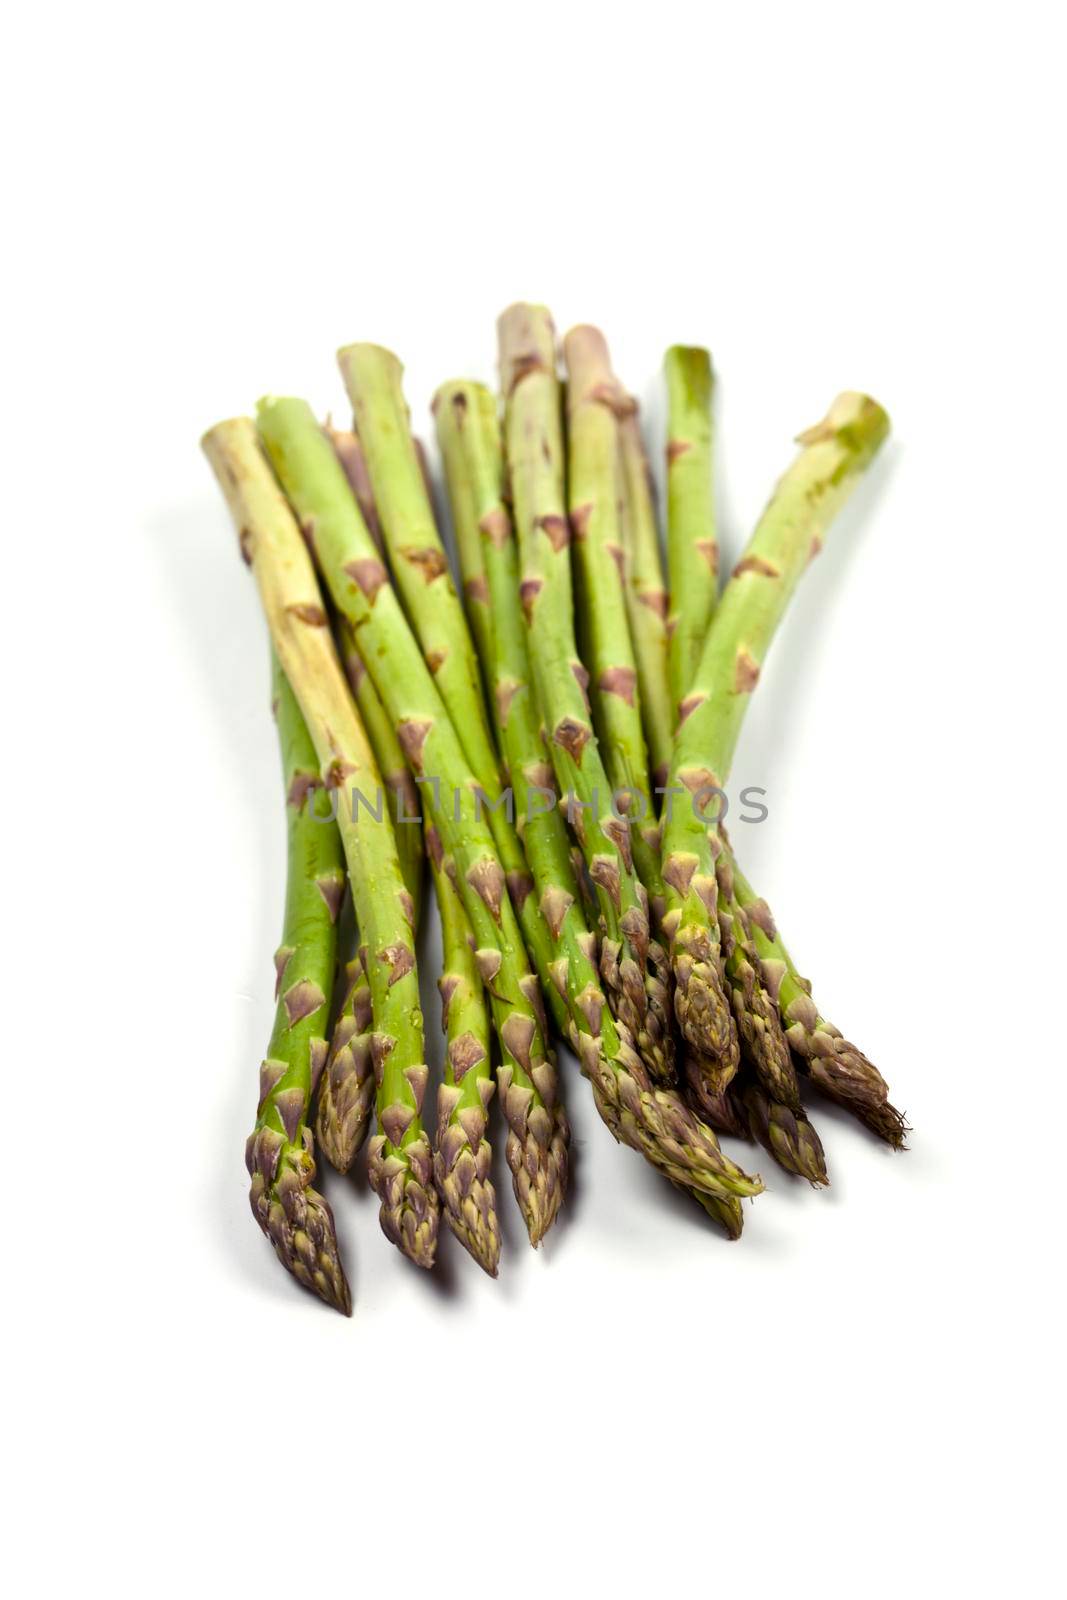 Bunch of fresh raw garden asparagus isolated on white background. Green spring vegetables. by marylooo